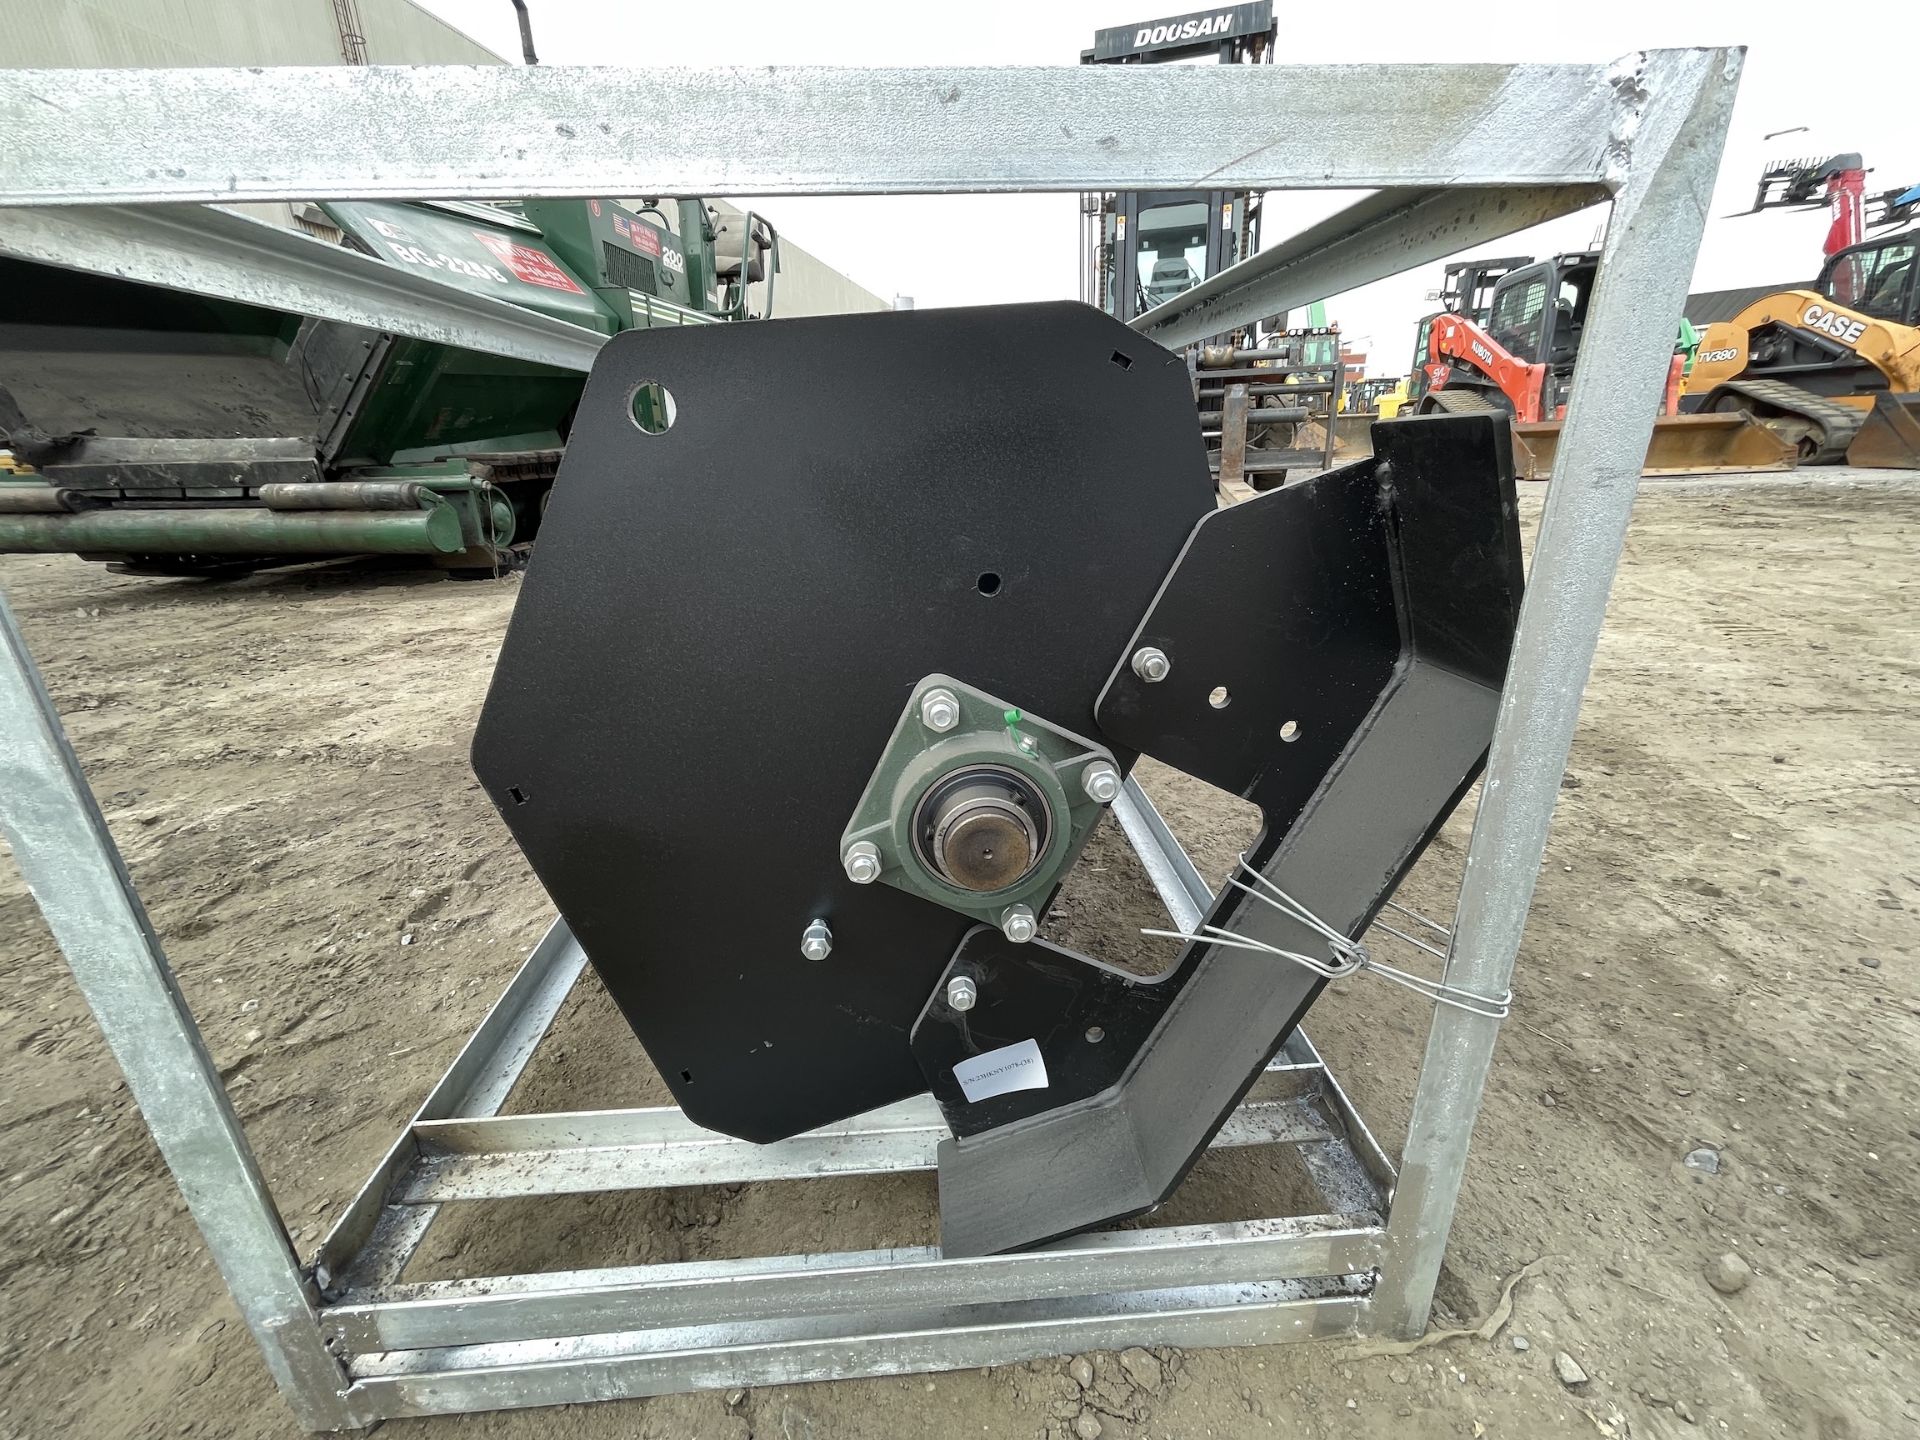 Brand New Greatbear 72" Rotary Cultivator Skid Steer Attachment (NY157) - Image 8 of 11